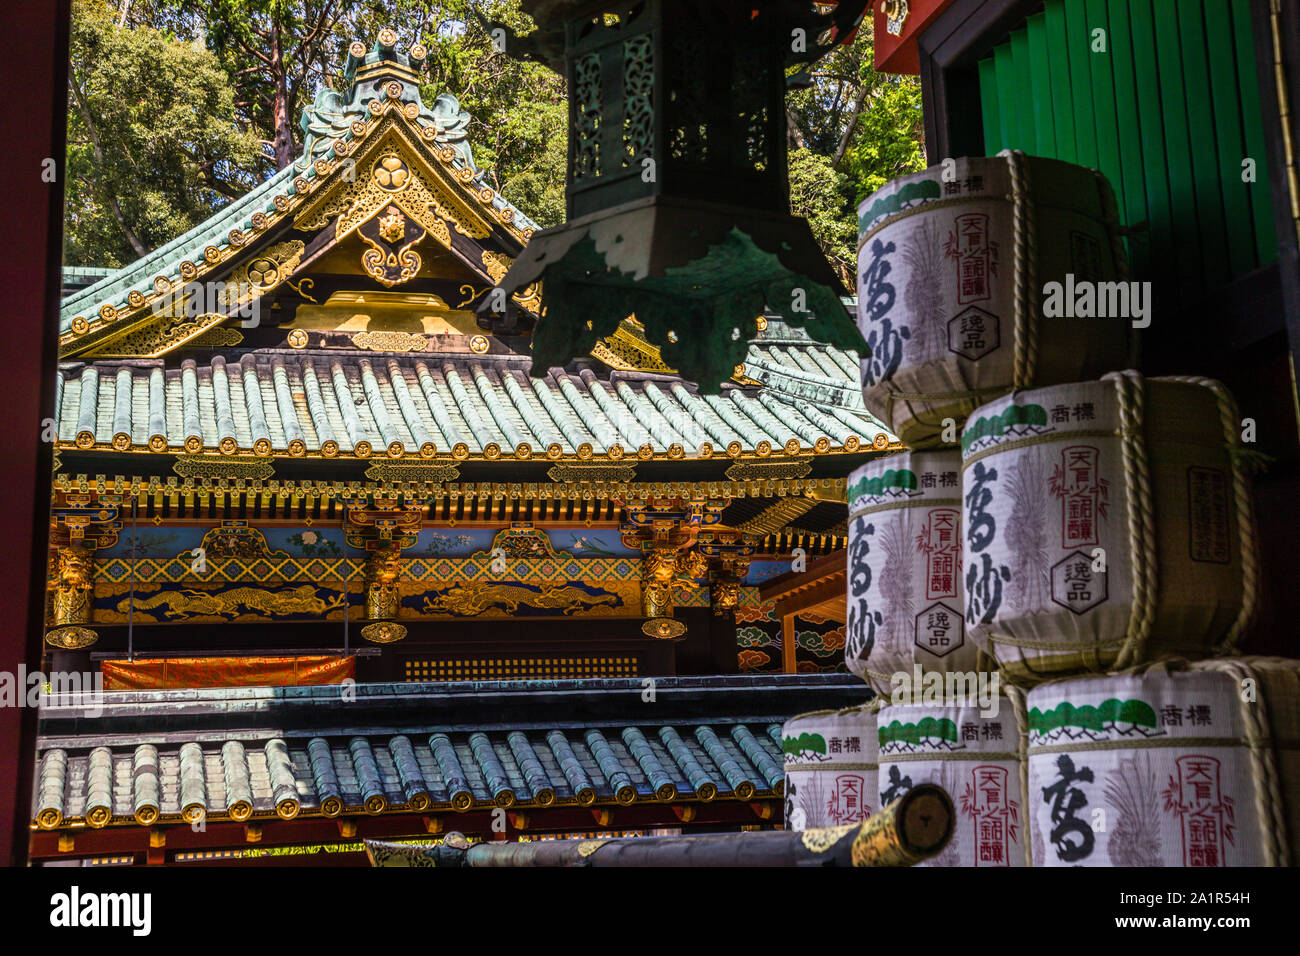 Kunozan Toshogu Shrine in Shizuoka, Japan. Toshogu Shrine along with its outbuildings are magnificently ornamented and decorated with Japanese lacquer. In front of the entrance to the main building are stacked and very decorative sake barrels. They are an offering to Tokugawa Ieyasu Stock Photo